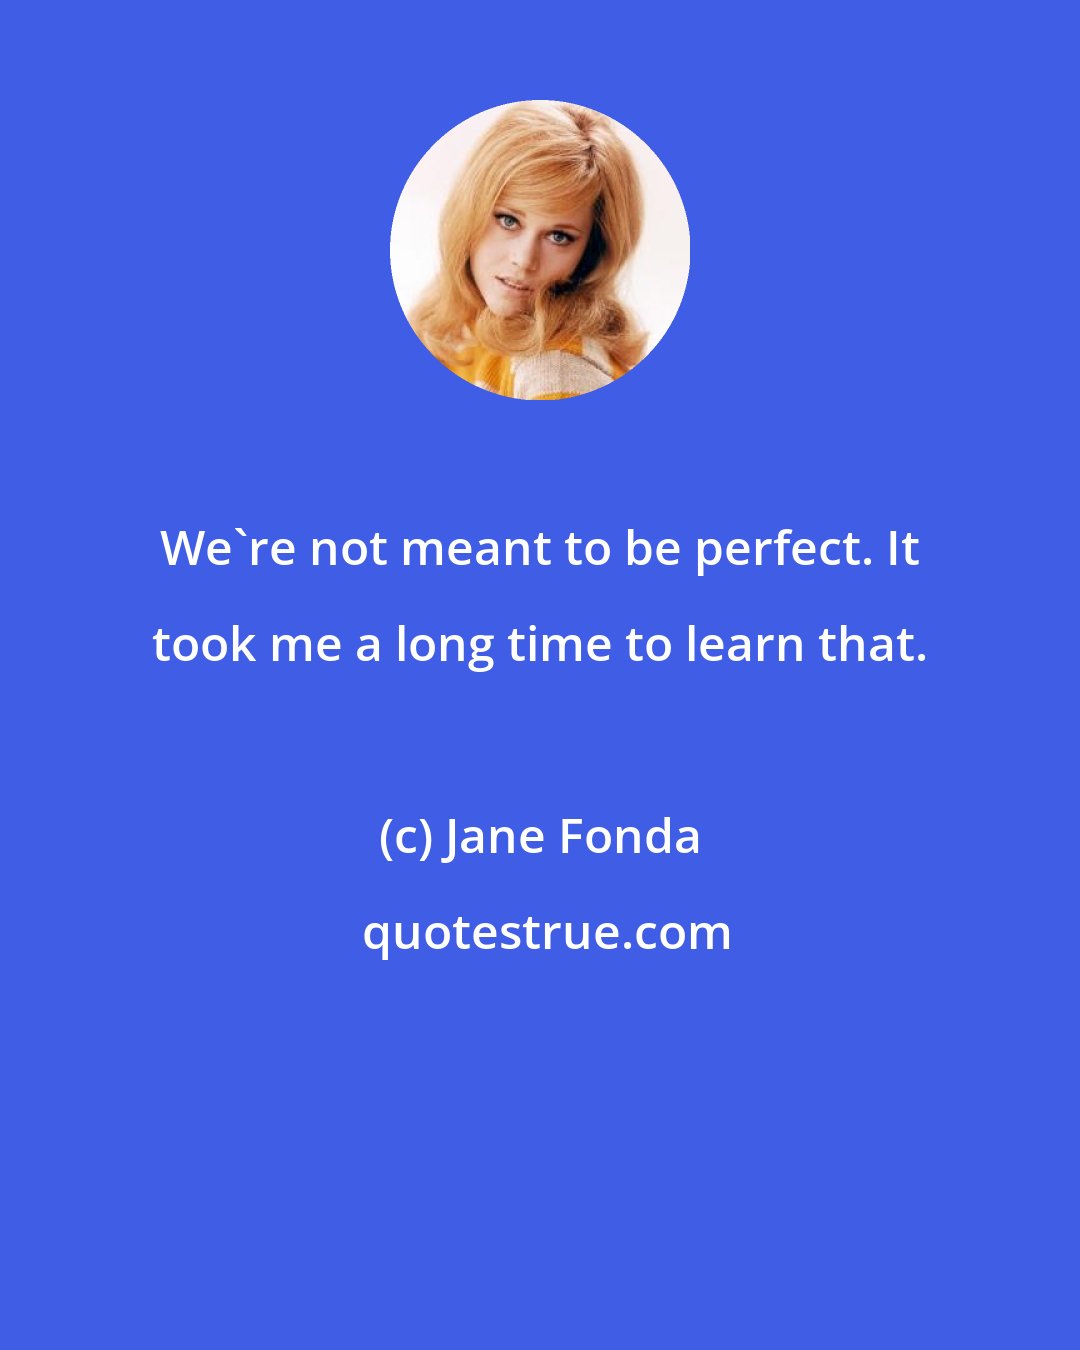 Jane Fonda: We're not meant to be perfect. It took me a long time to learn that.